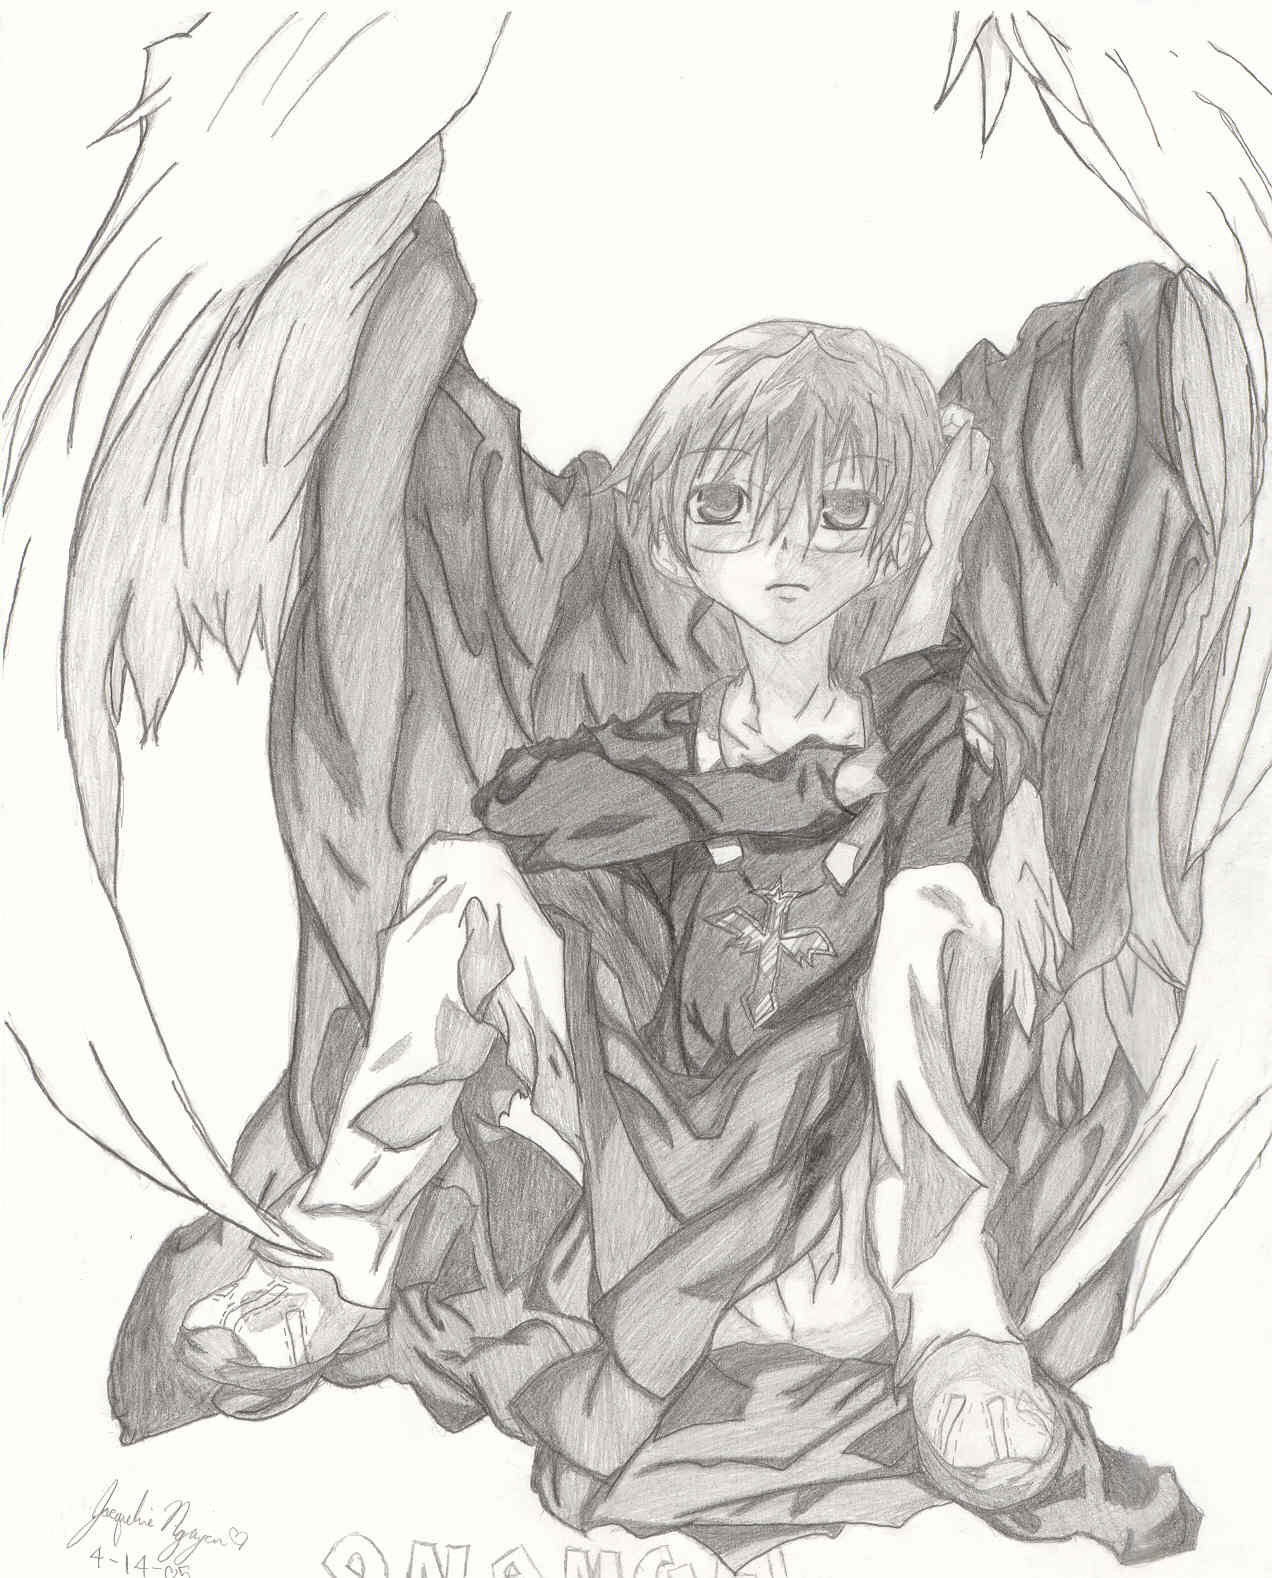 Satoshi and his wings by lil_dorky_gurl